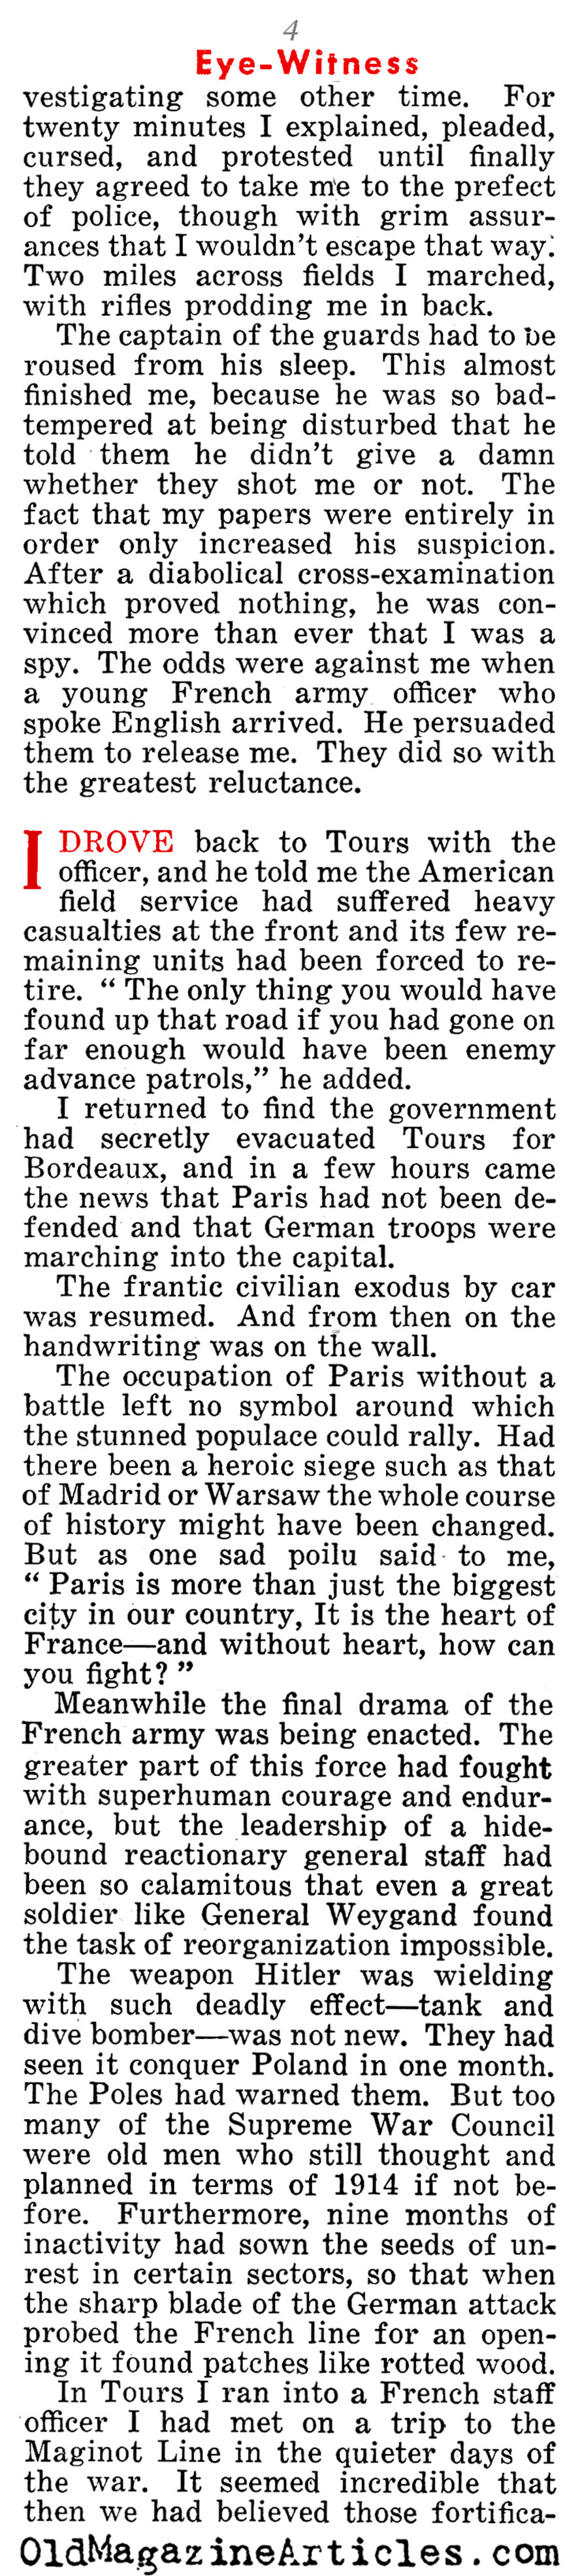 He Saw the French Defense Implode (Liberty Magazine, 1940)